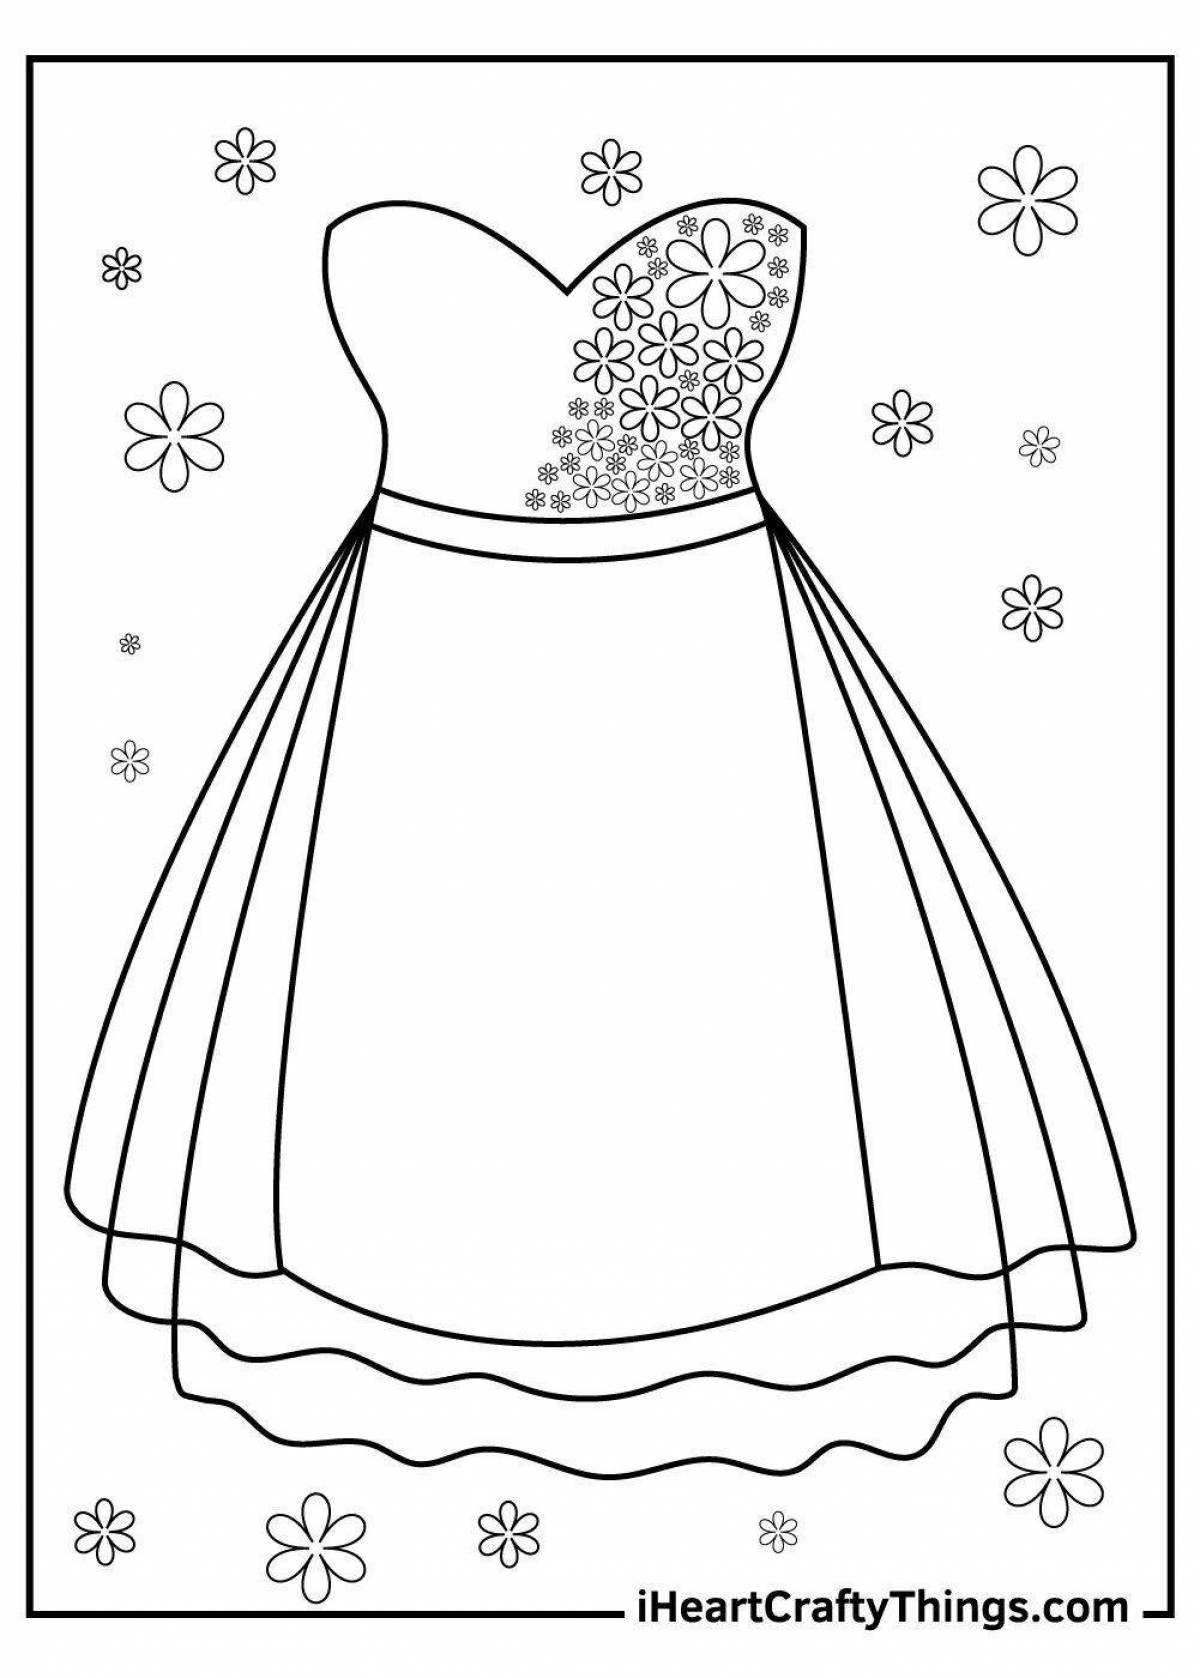 Coloring book cute doll dress for children 4-5 years old